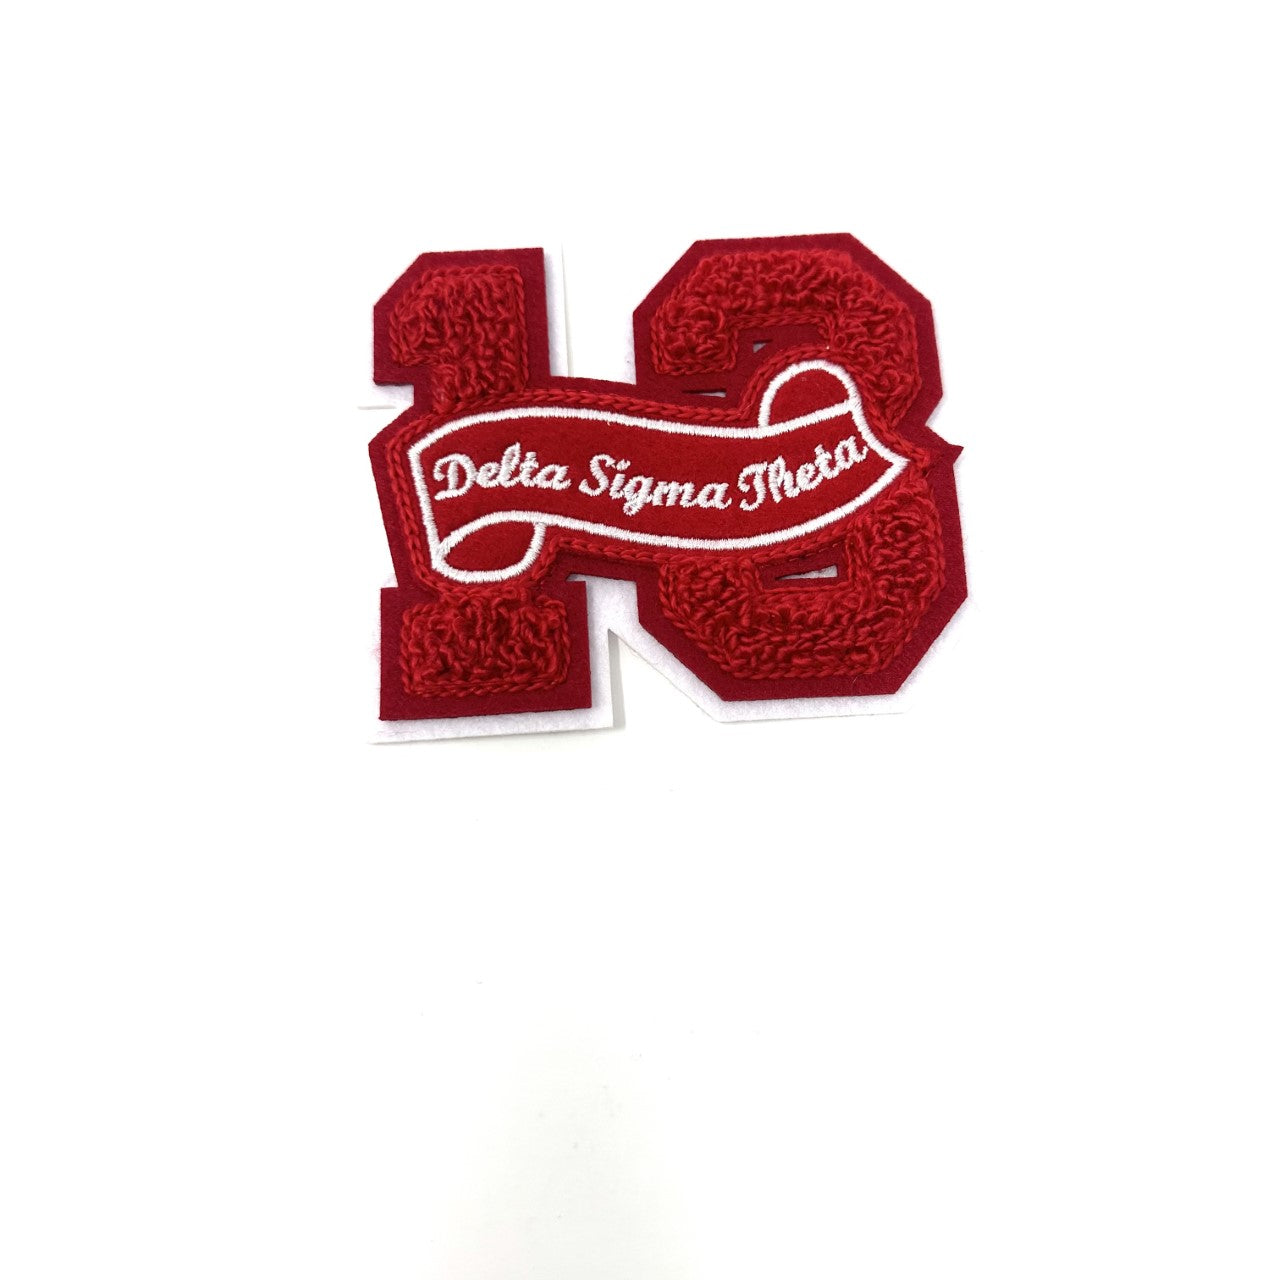 DST 13 with Delta Sigma Theta 3.5 Inch Chenille Patch